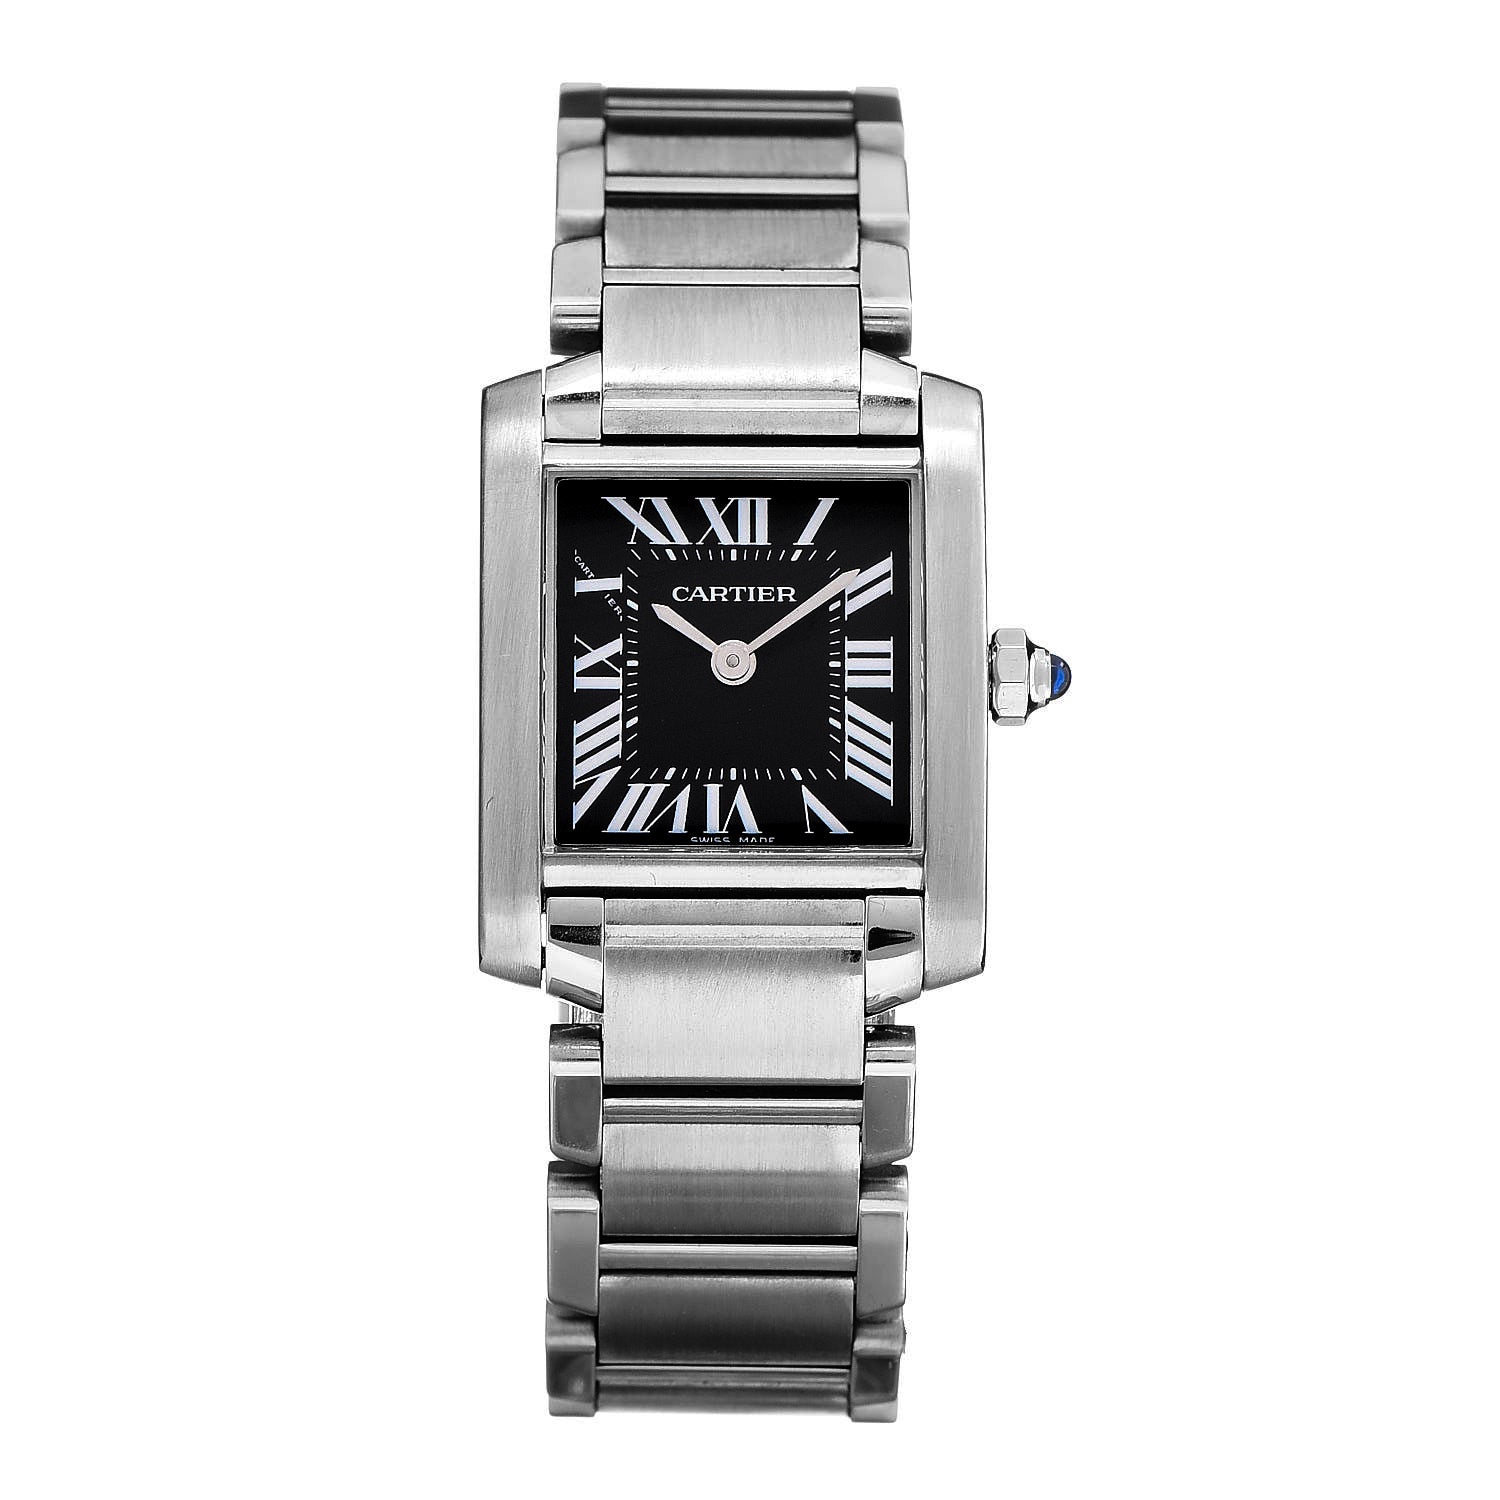 Cartier Tank Francaise Black Dial Watch 2384 - Crown Jewelers